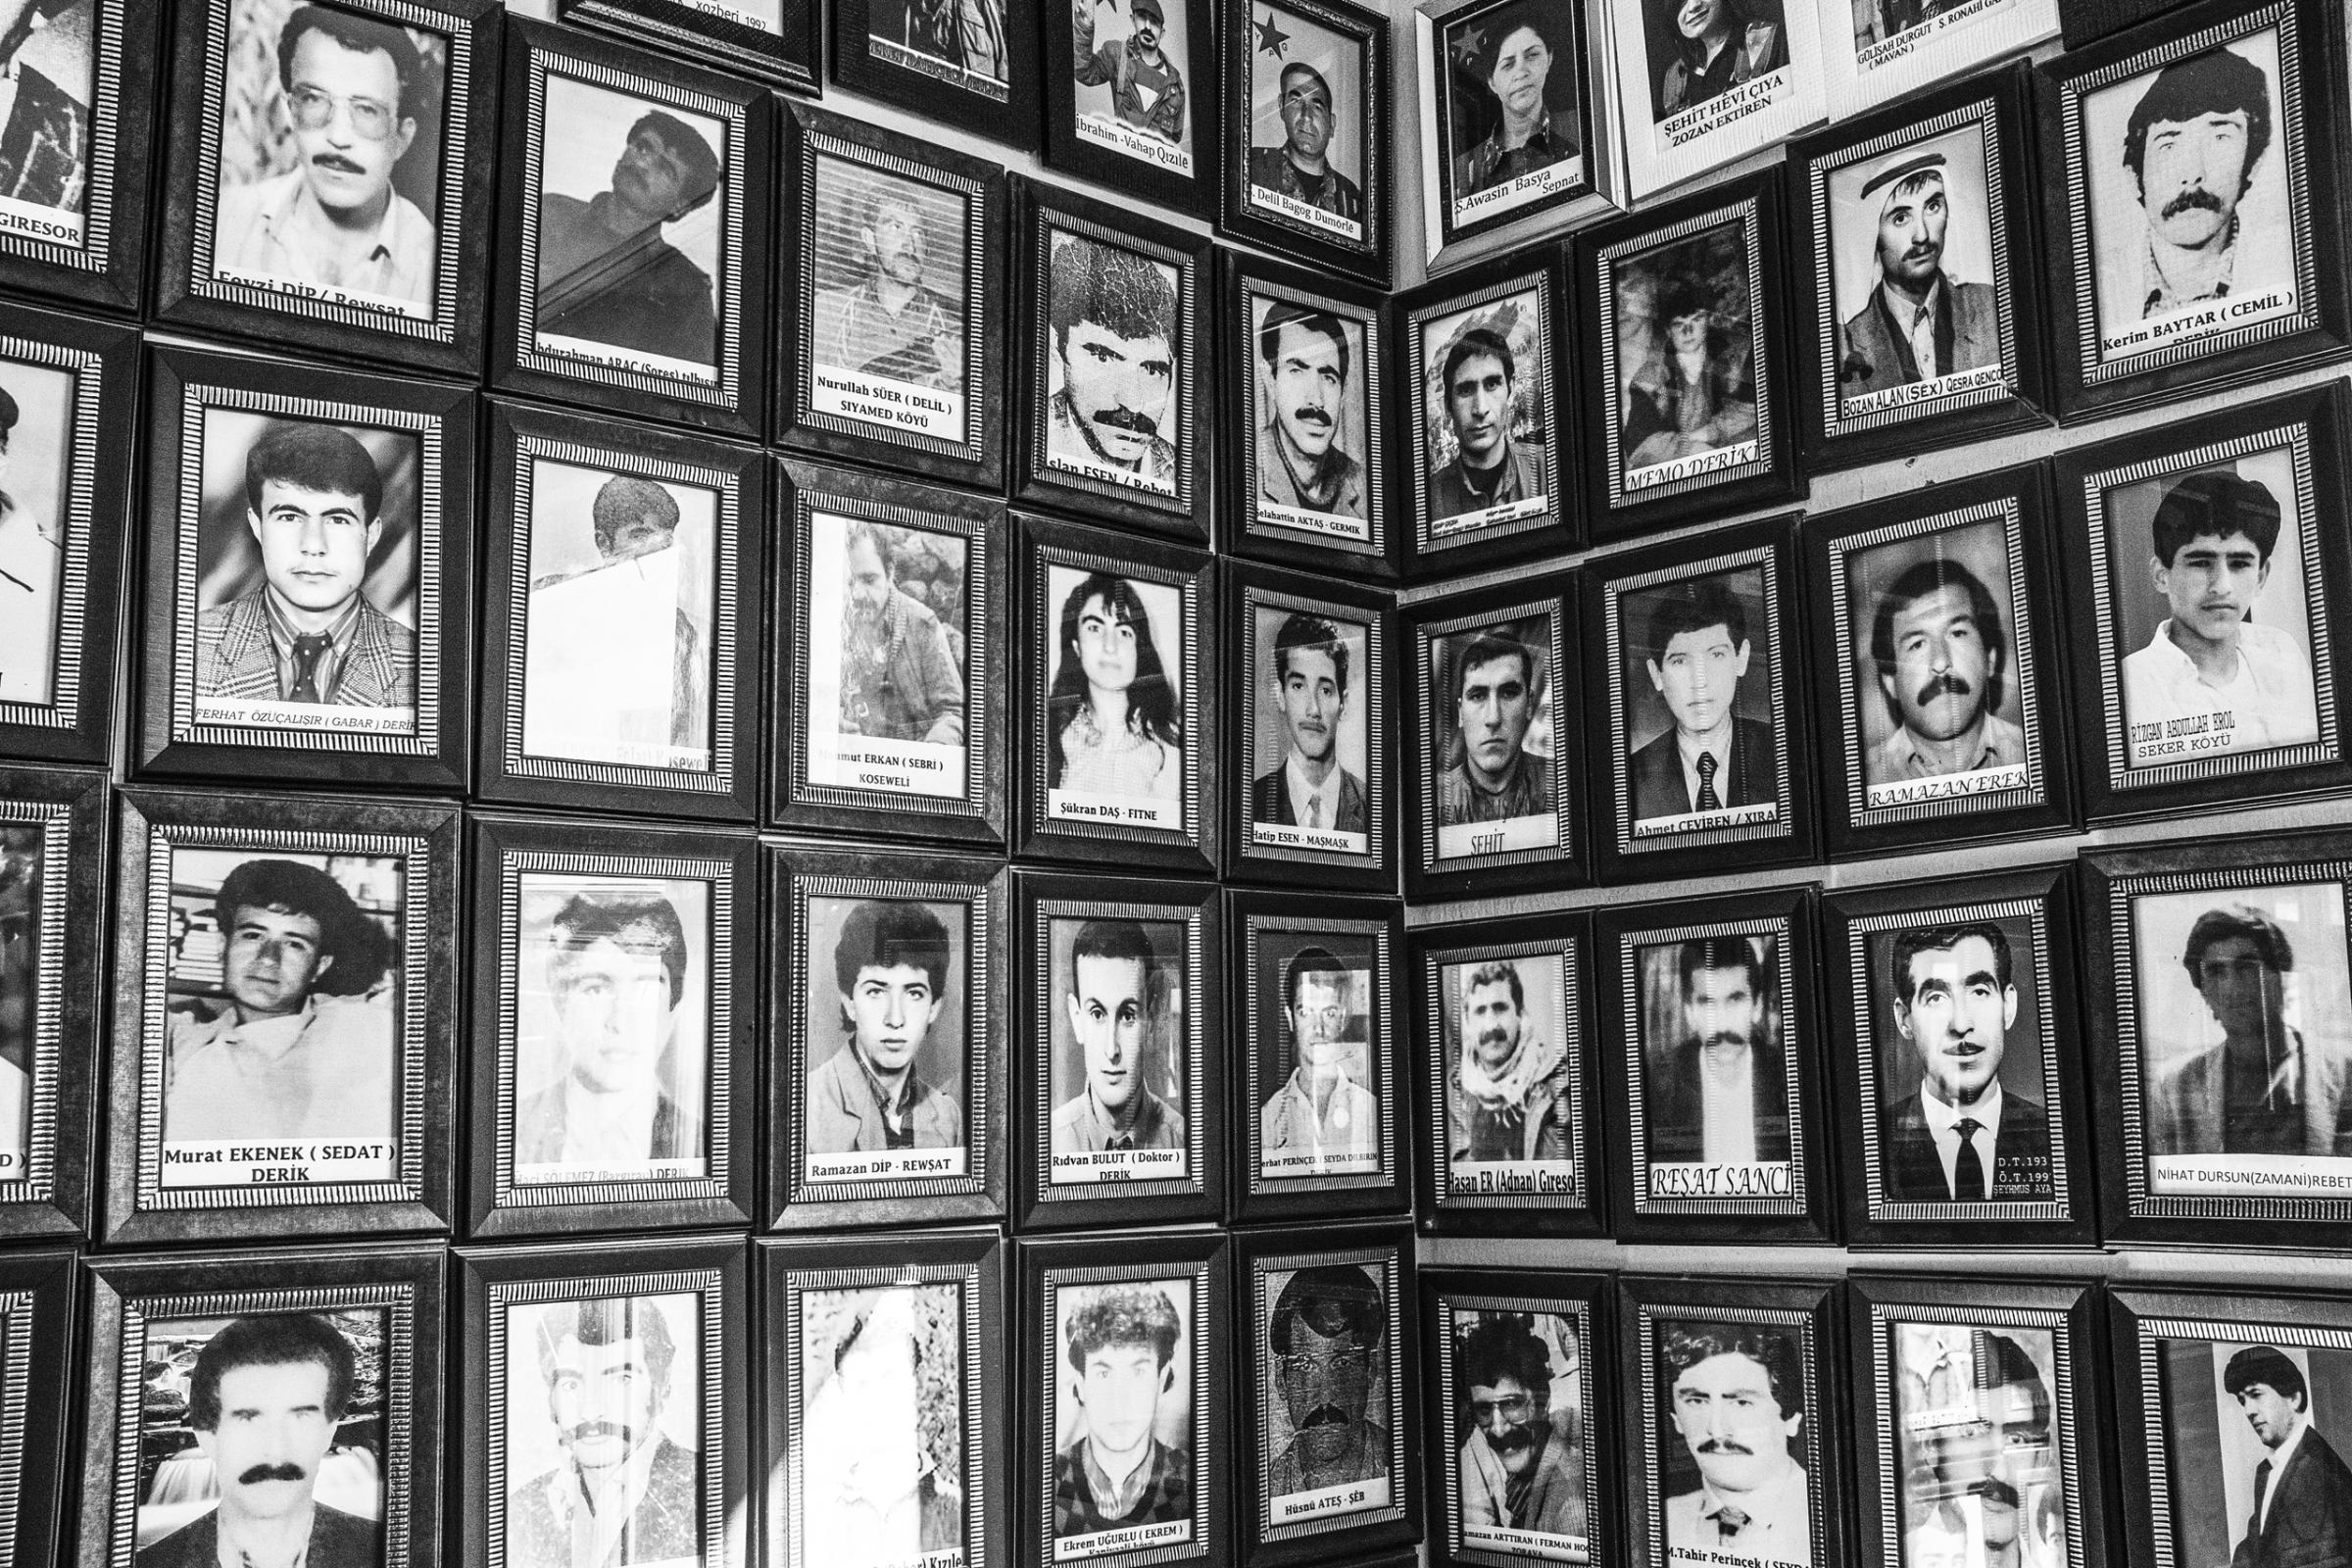 Portraits of Derik's Kurdistan Workers Party (PKK) members who have been killed by Turkish security forces over the last 40 years hang on a wall, Derik, Turkey, Dec. 2015.